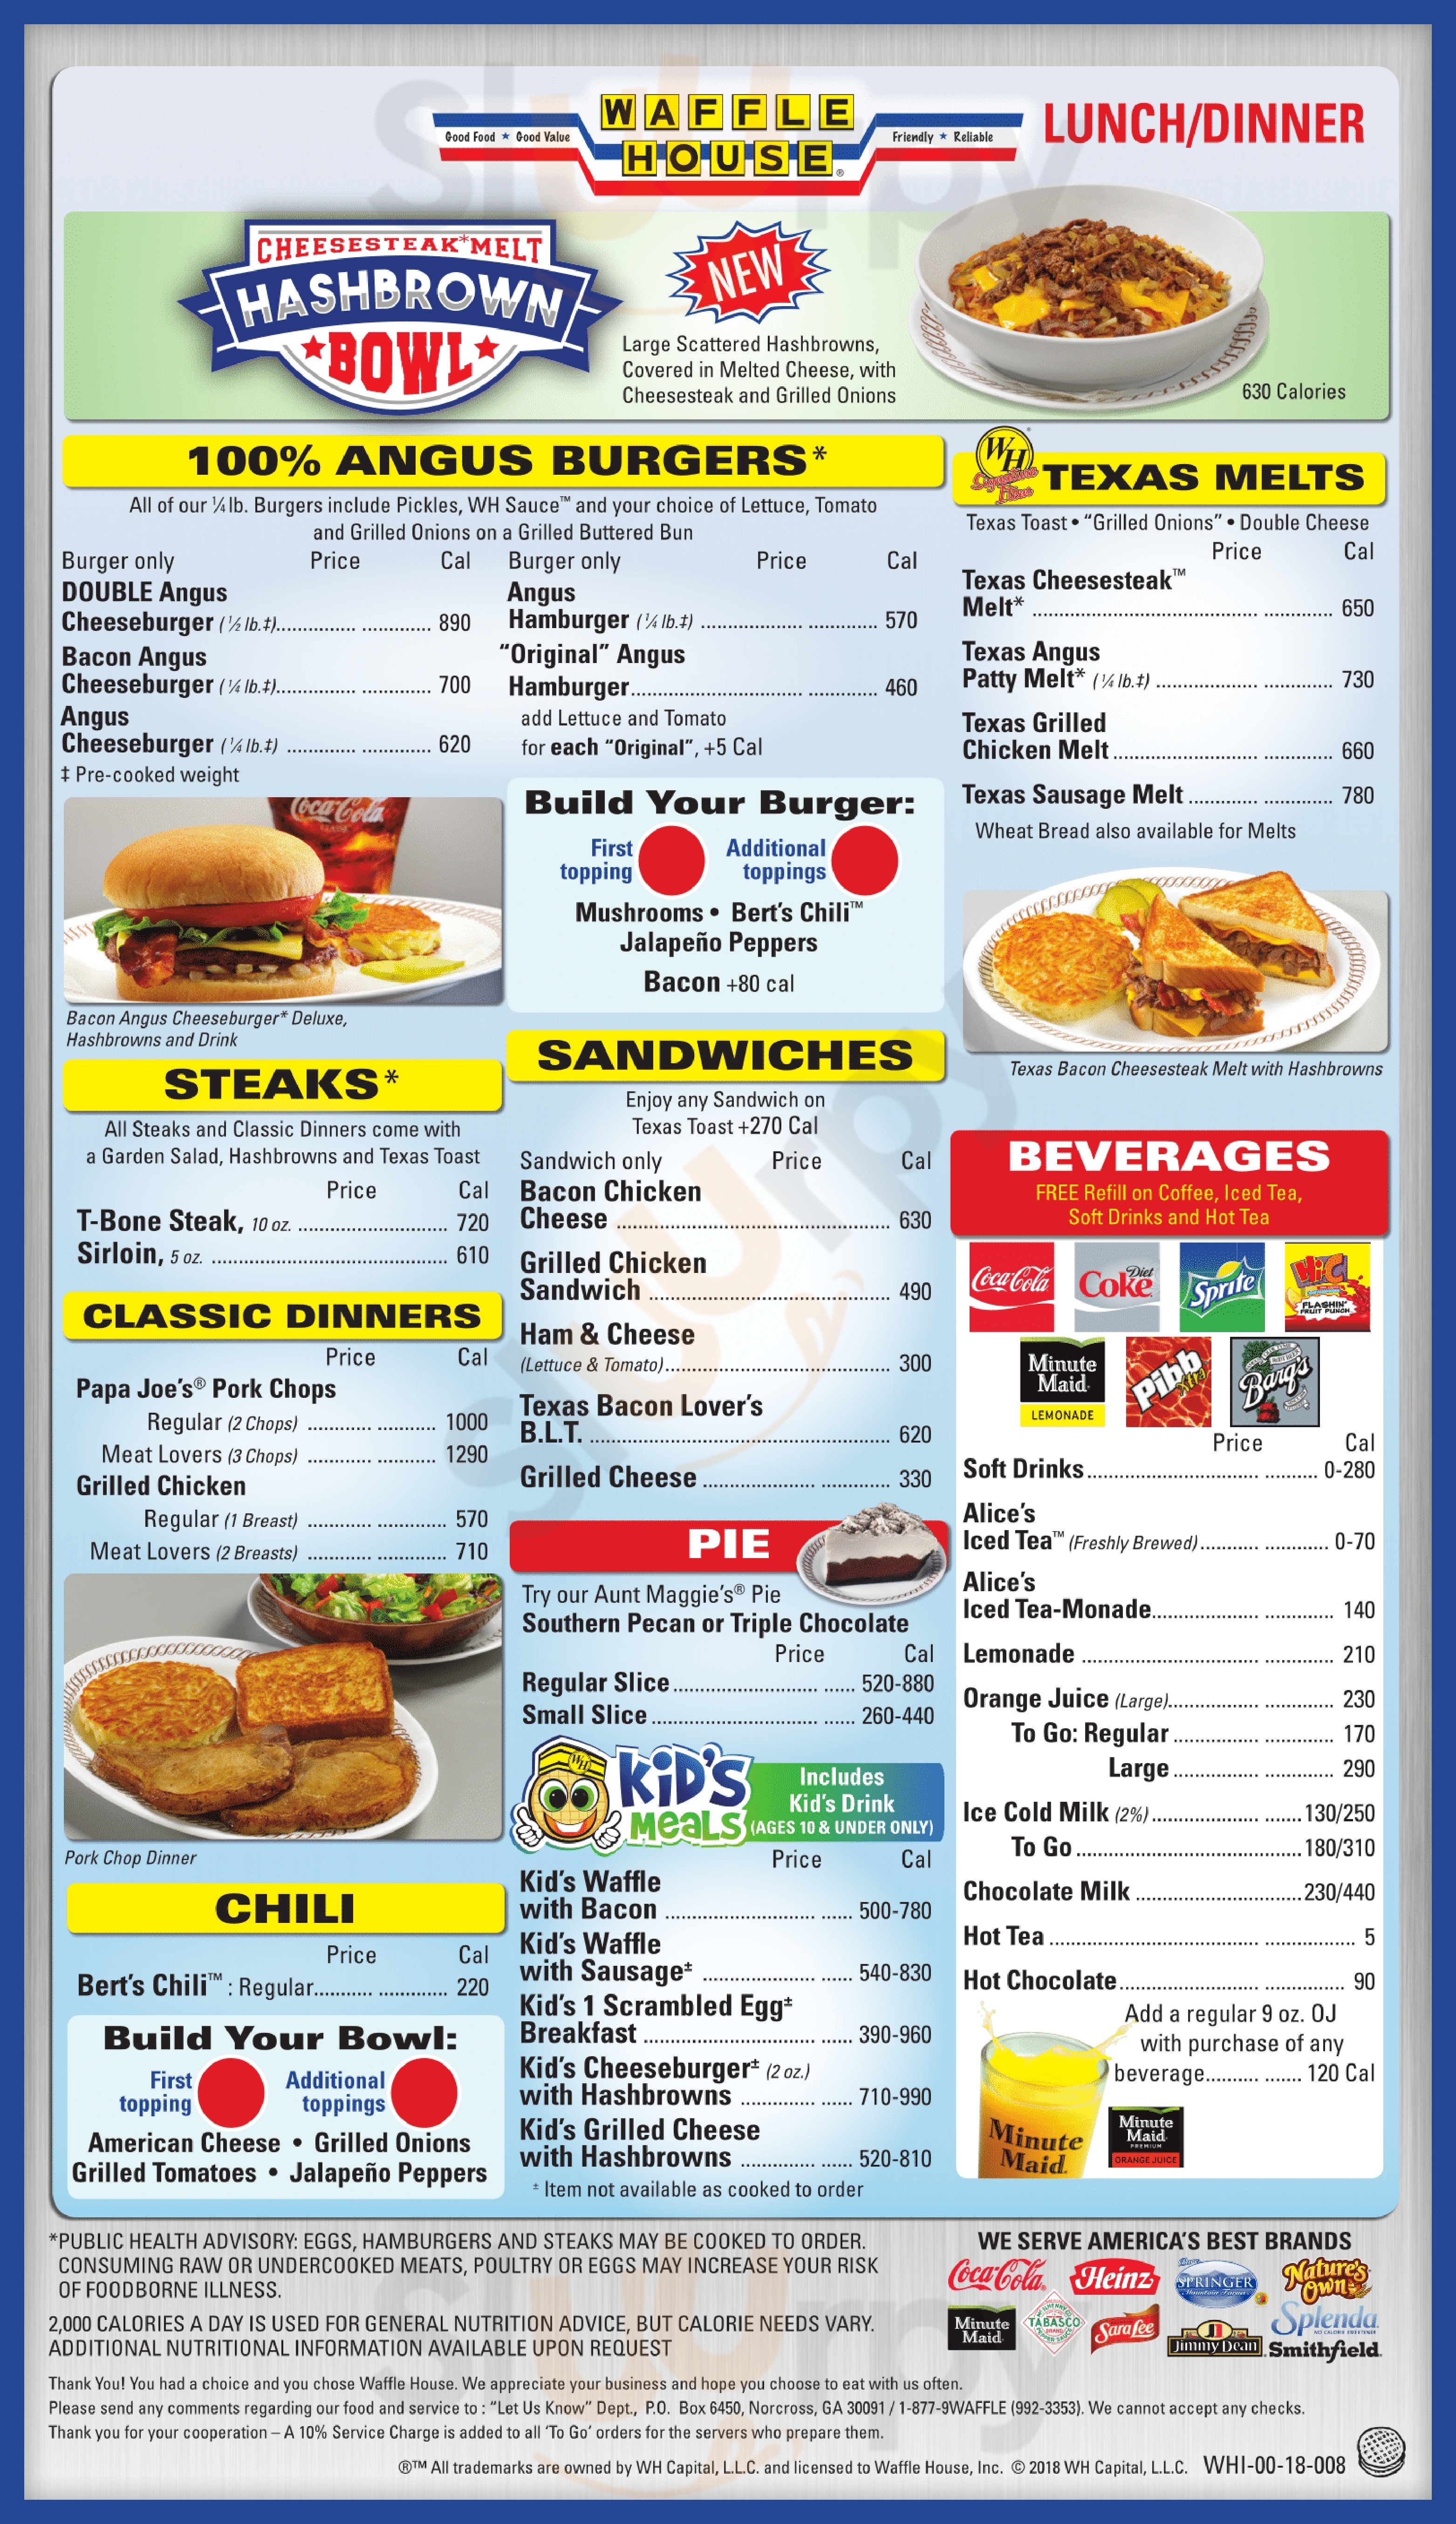 Waffle House New Orleans Menu - 1